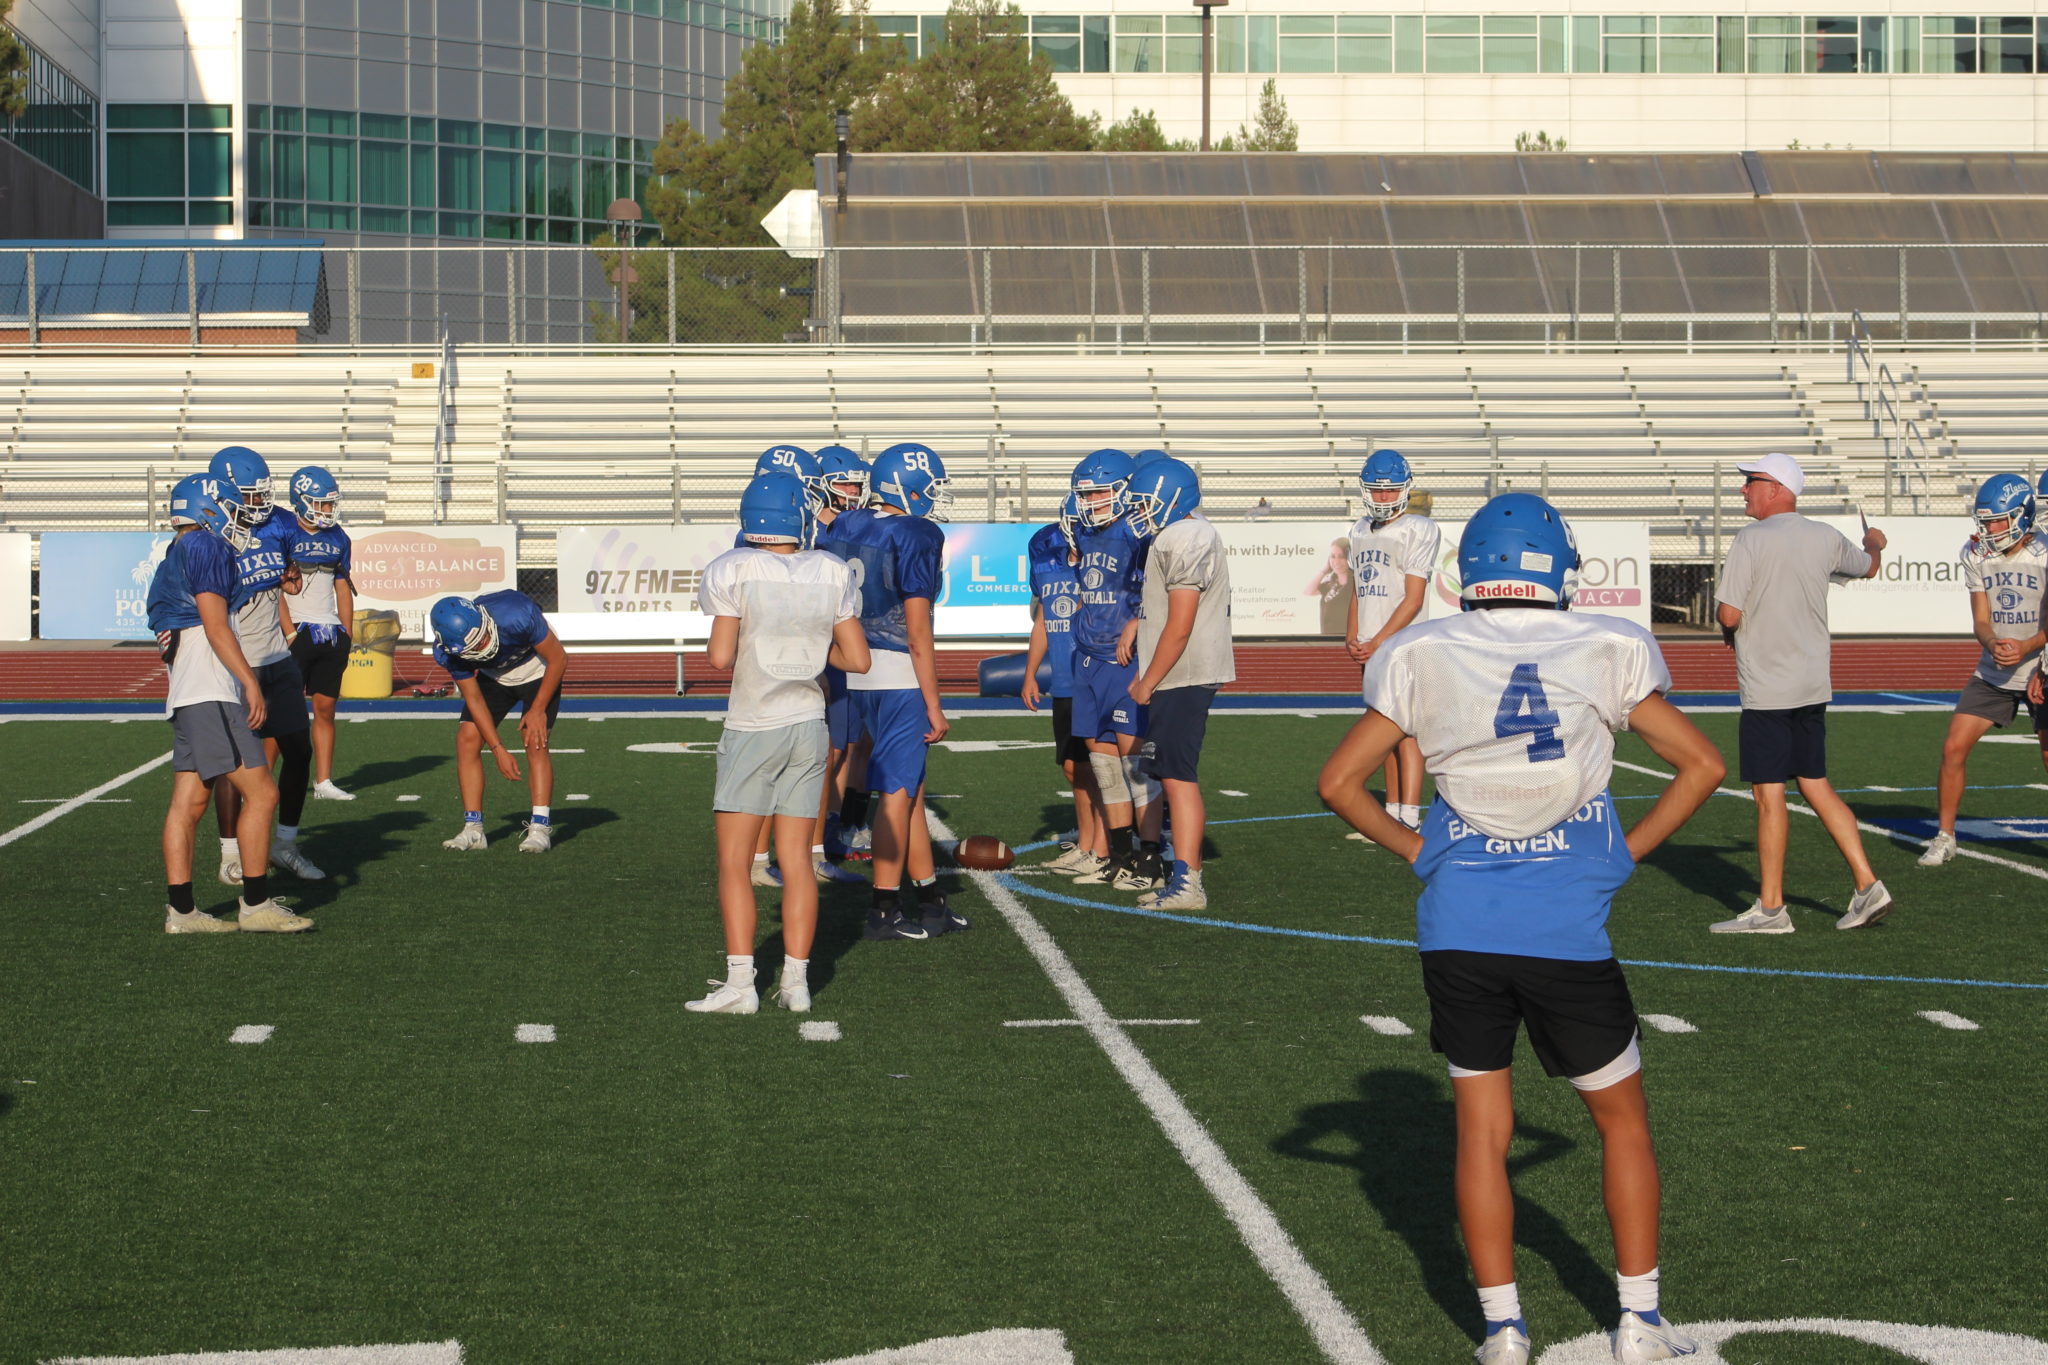 Region 9 football preview: Dixie looks to hold their own in Region 9